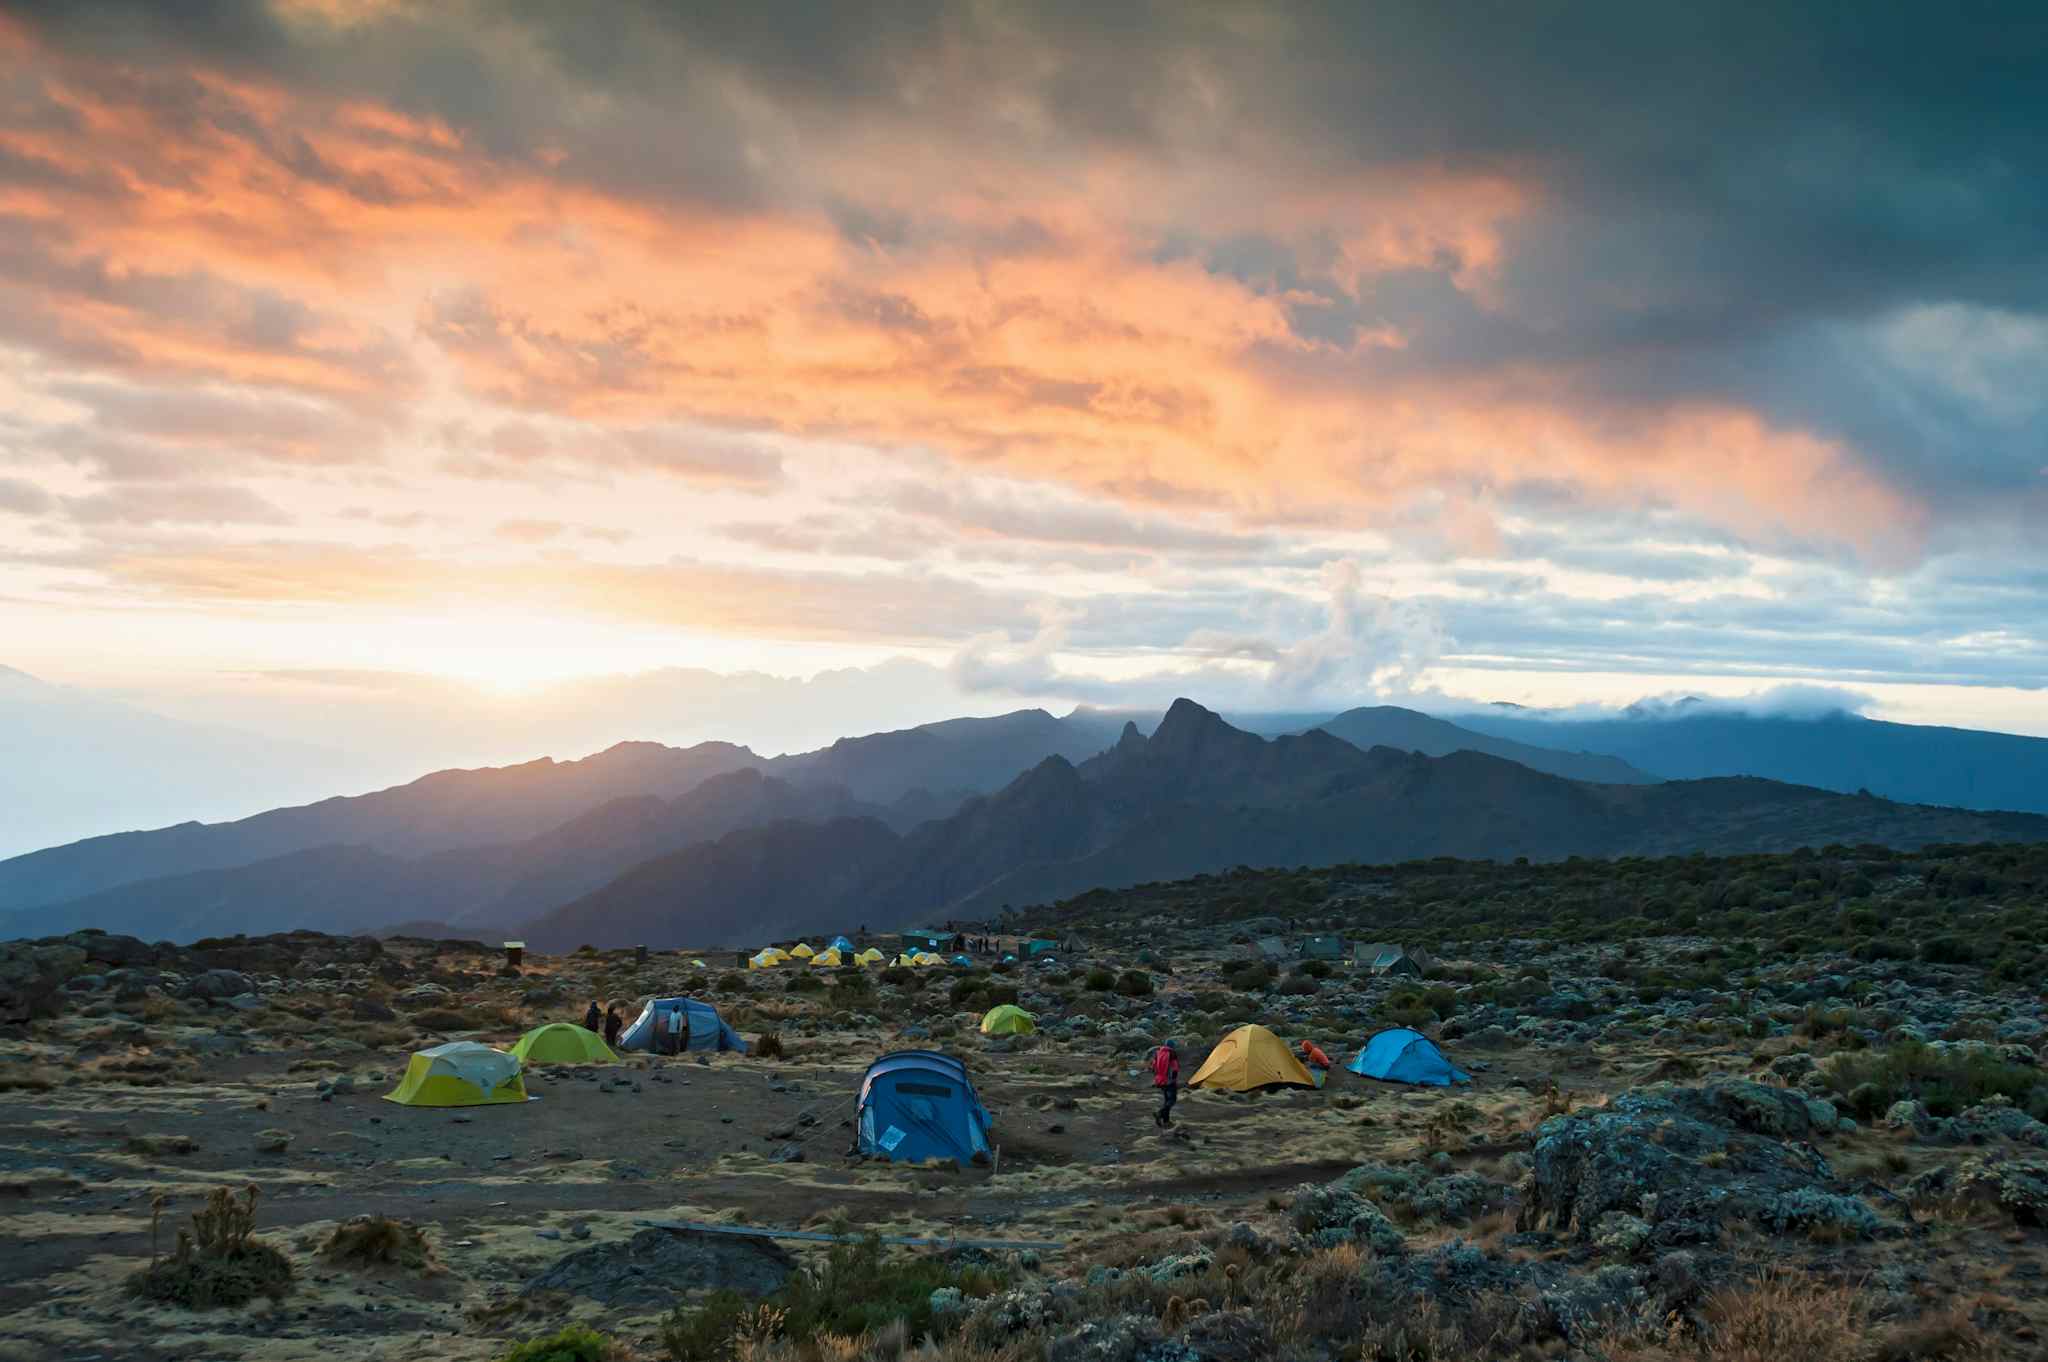 Colourful tents at Shira Camp on Mount Kilimanjaro, with mountains and sunset coloured clouds in the background.